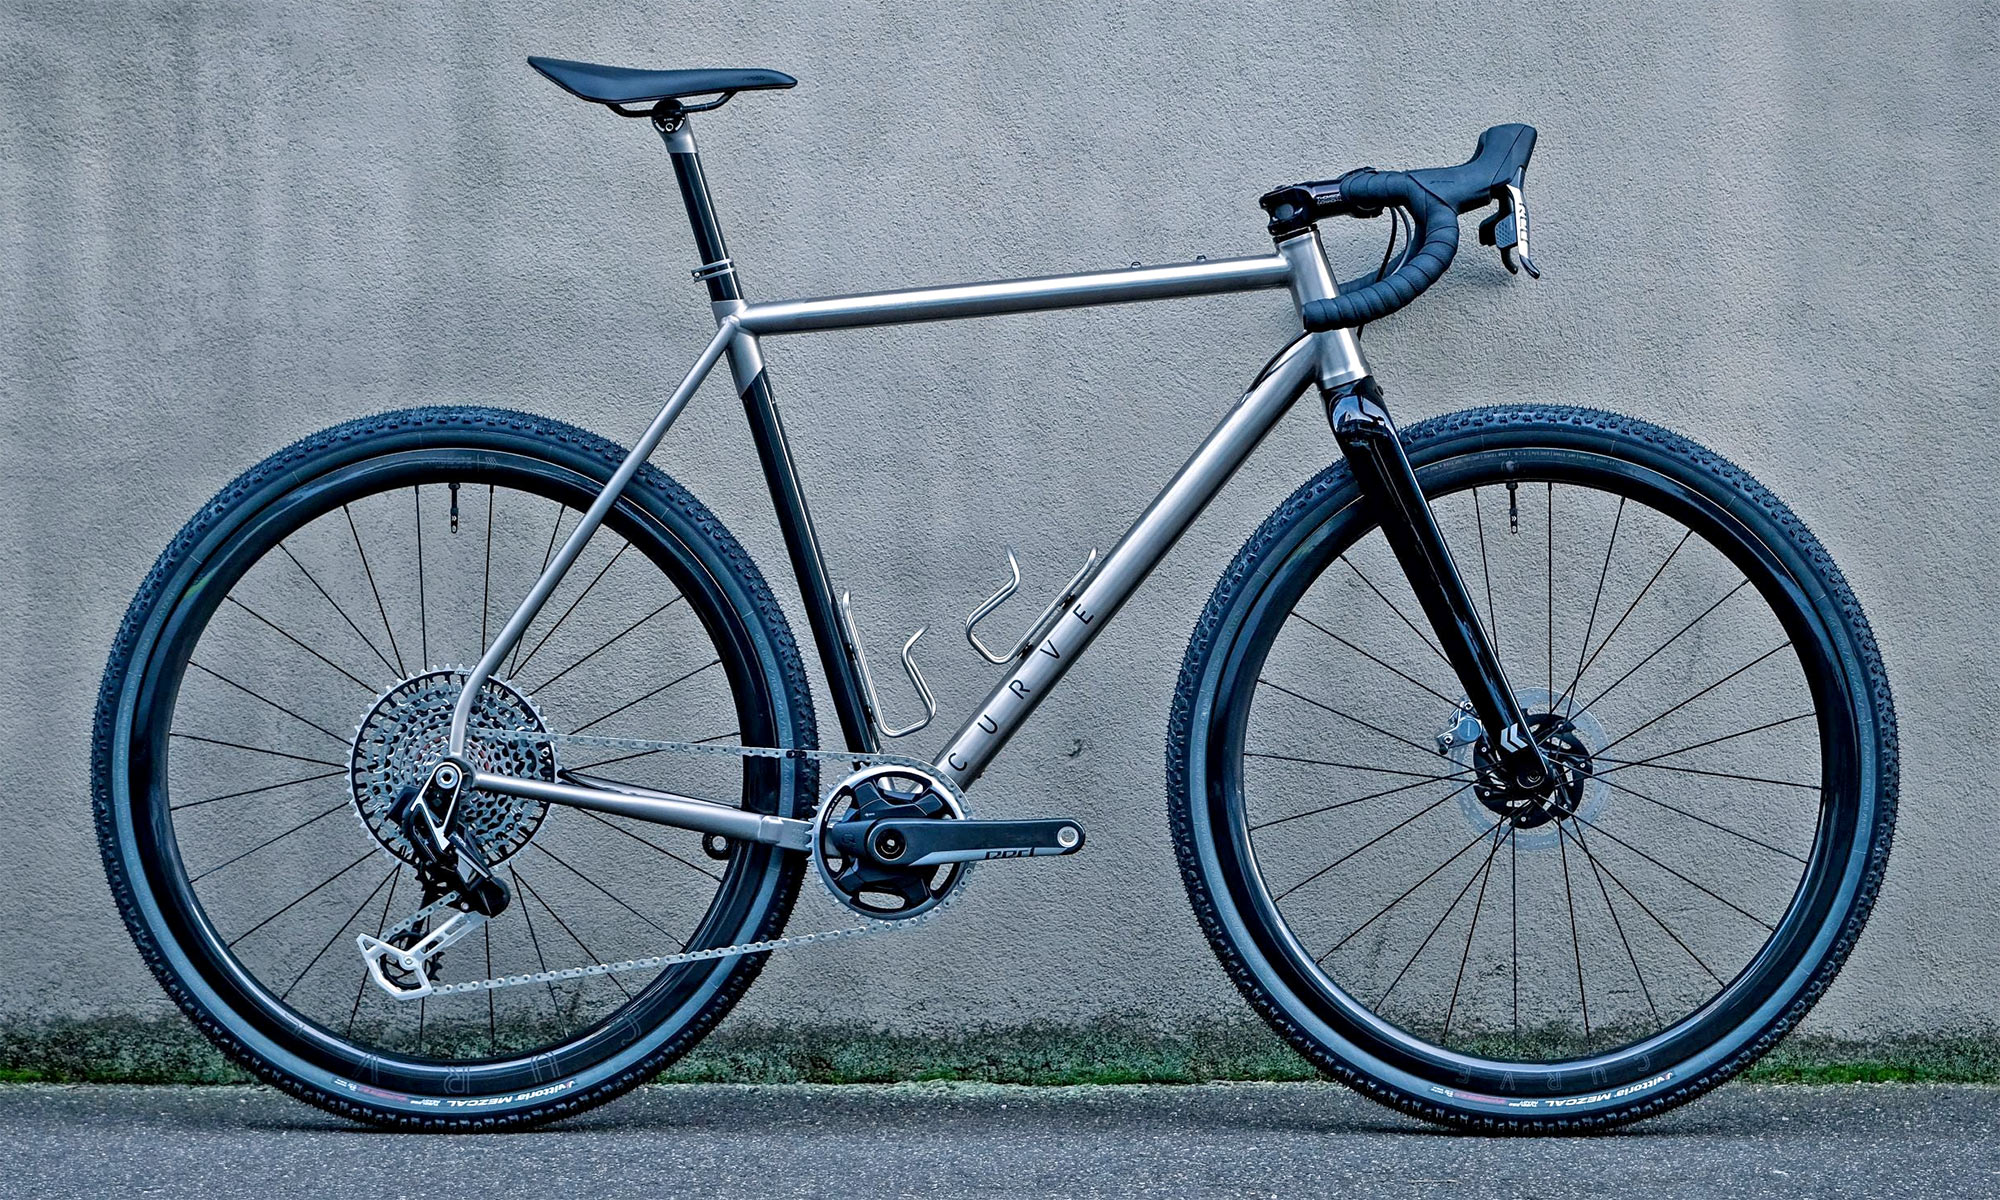 Curve Cycling AIR Kev prototype titanium and carbon version of the GXR gravel cross race bike, complete